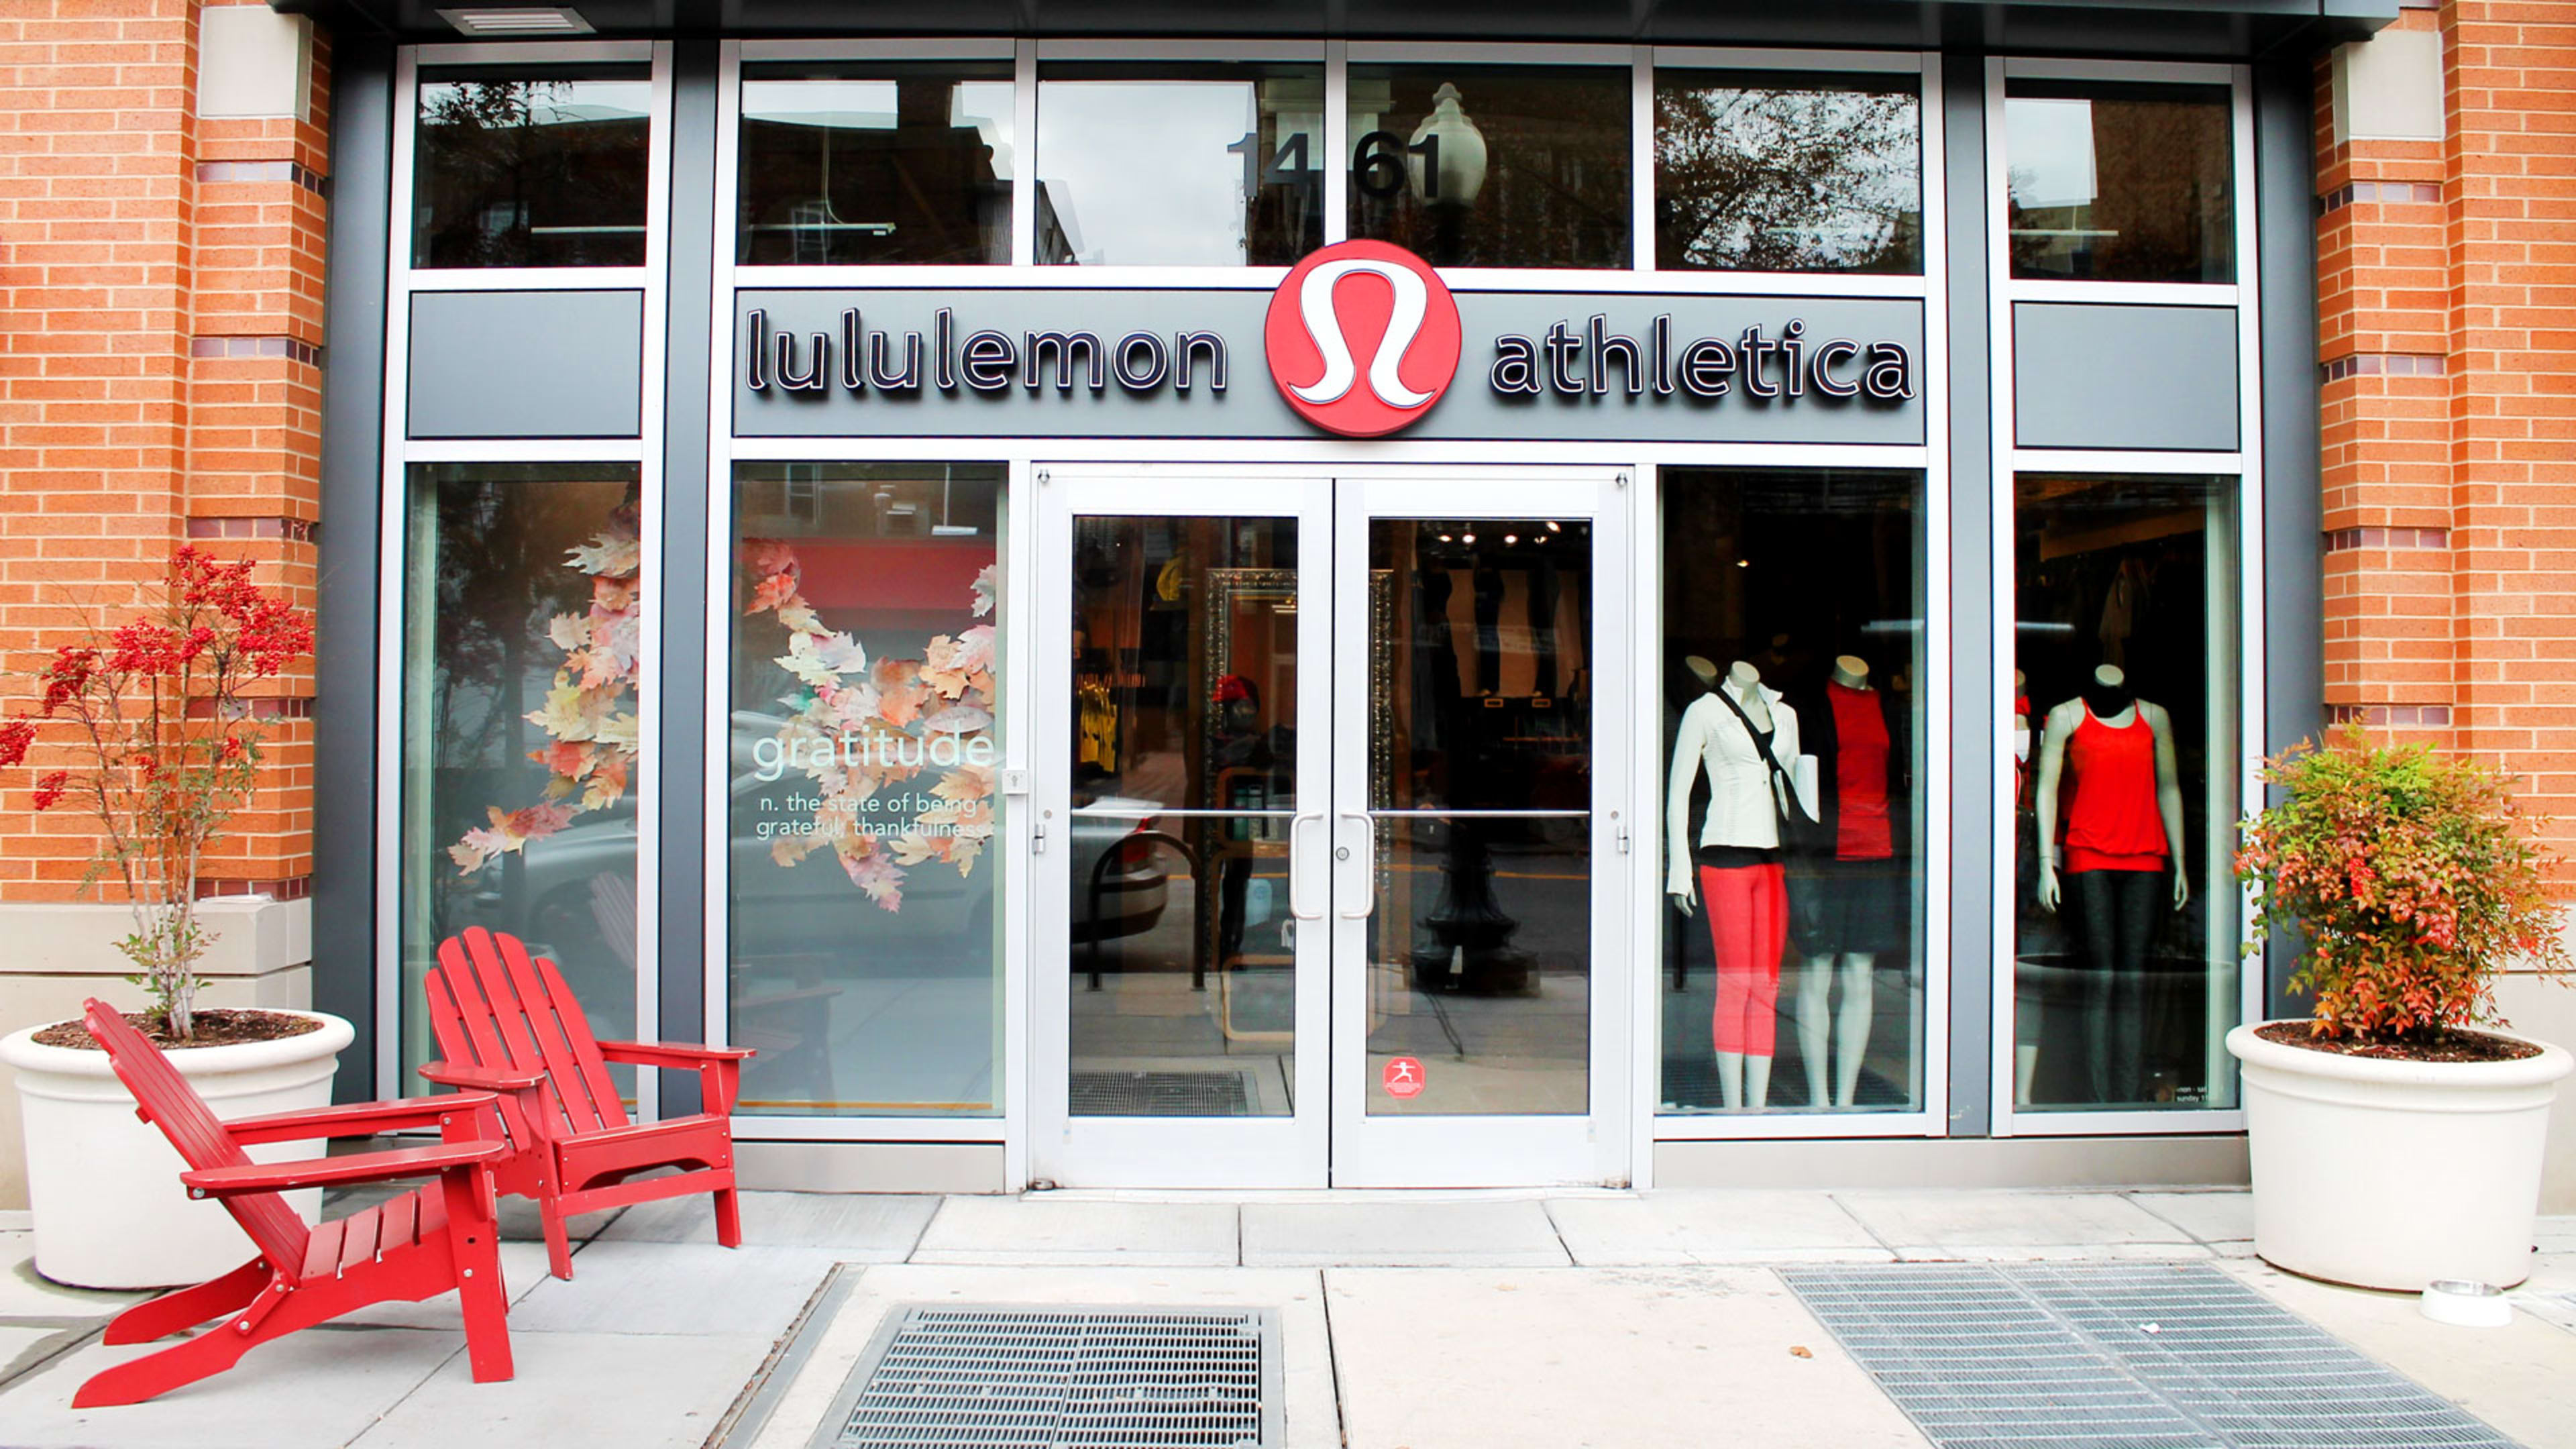 Lululemon’s CEO resigns after falling short of company’s “code of conduct”